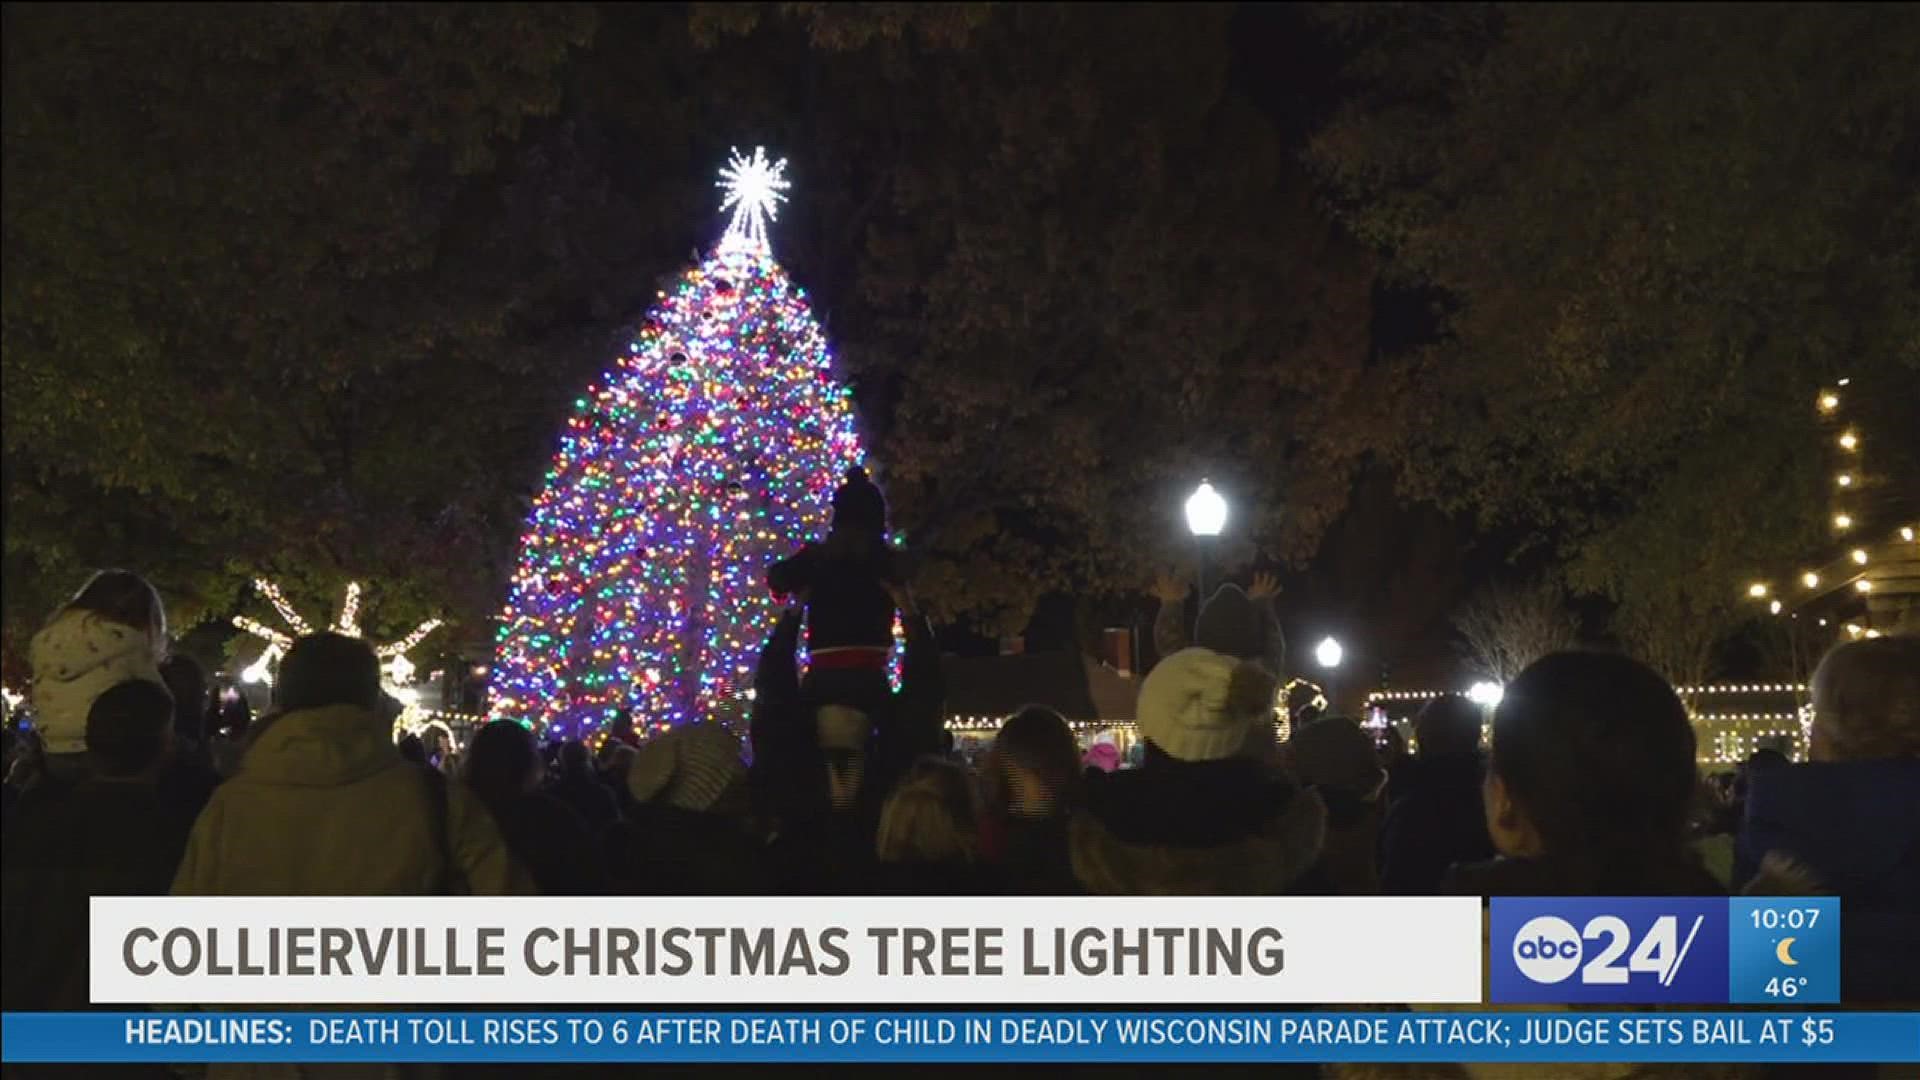 The town of Collierville returned its annual Christmas tree lighting after missing last year because of COVID.